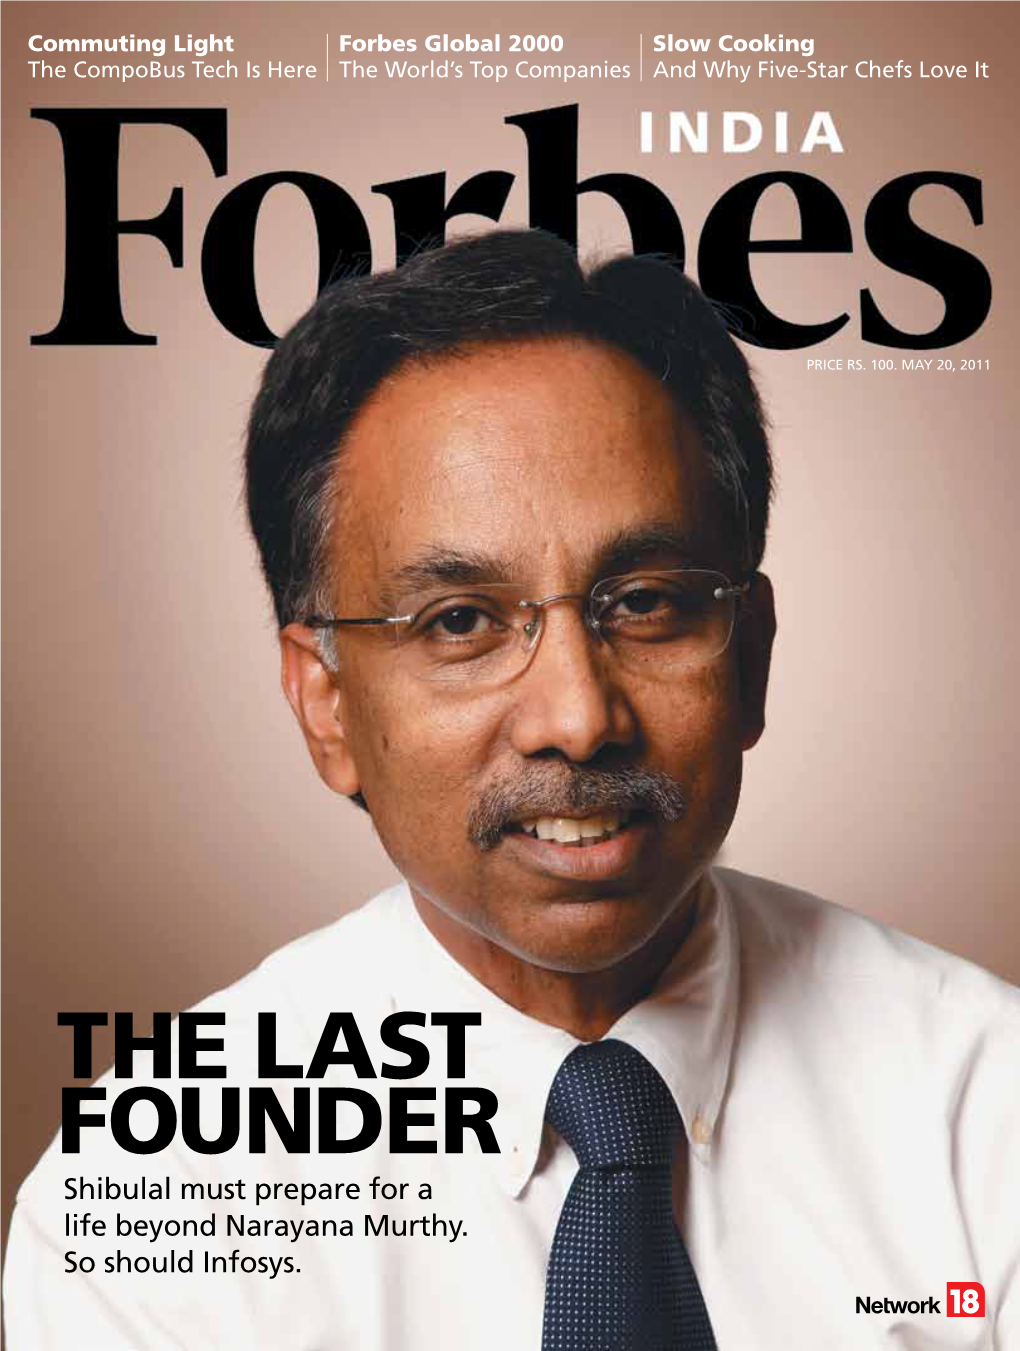 The Last Founder Shibulal Must Prepare for a Life Beyond Narayana Murthy